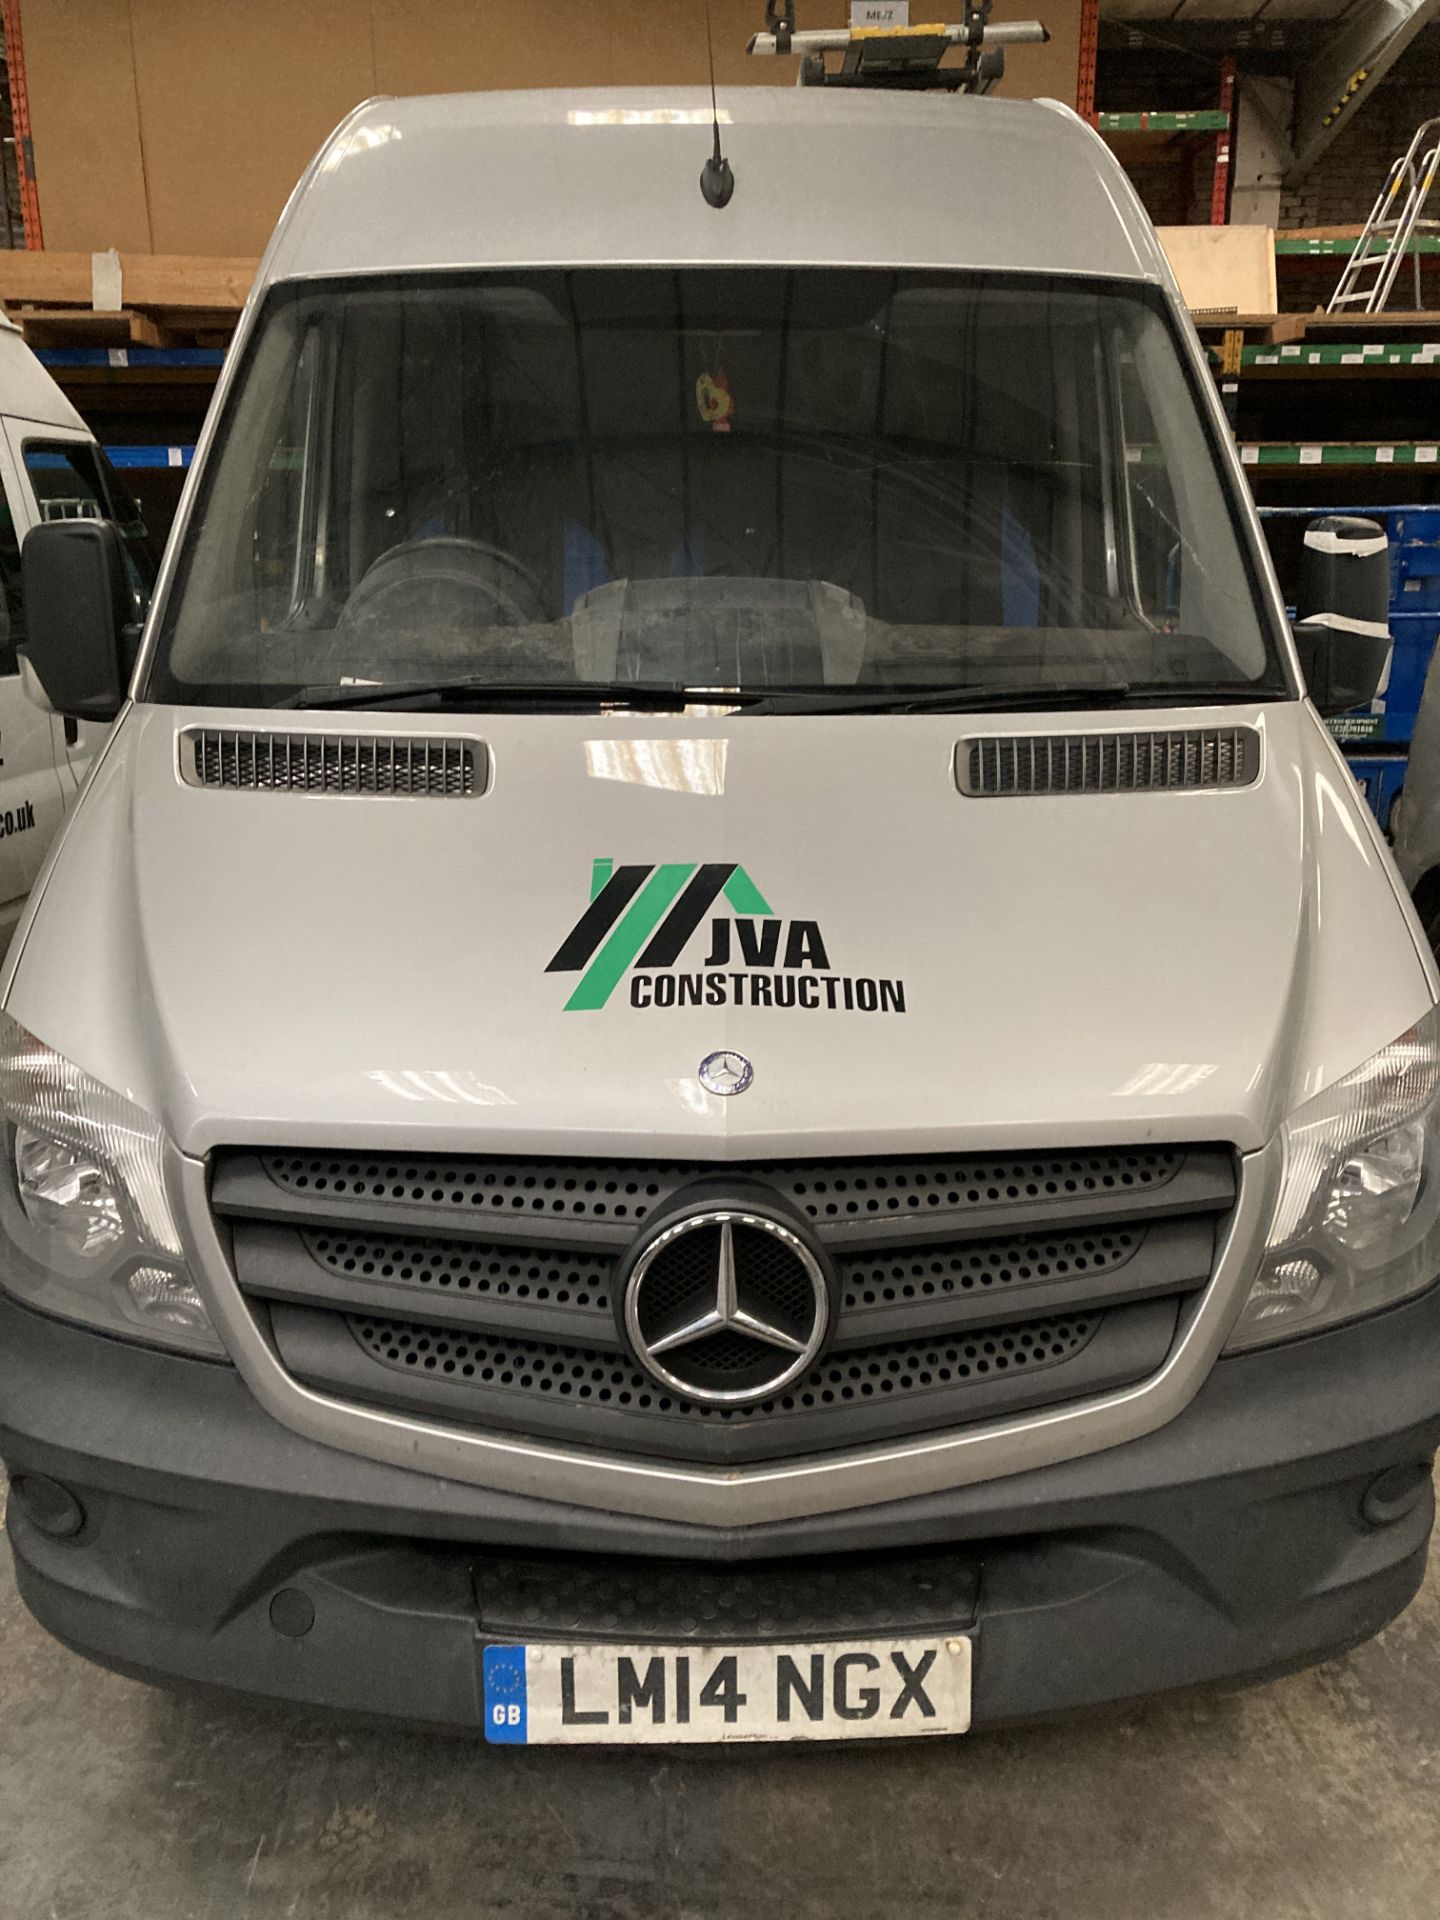 Mercedes Benz Sprinter | 14 Plate | 167,000 Miles - Image 3 of 16